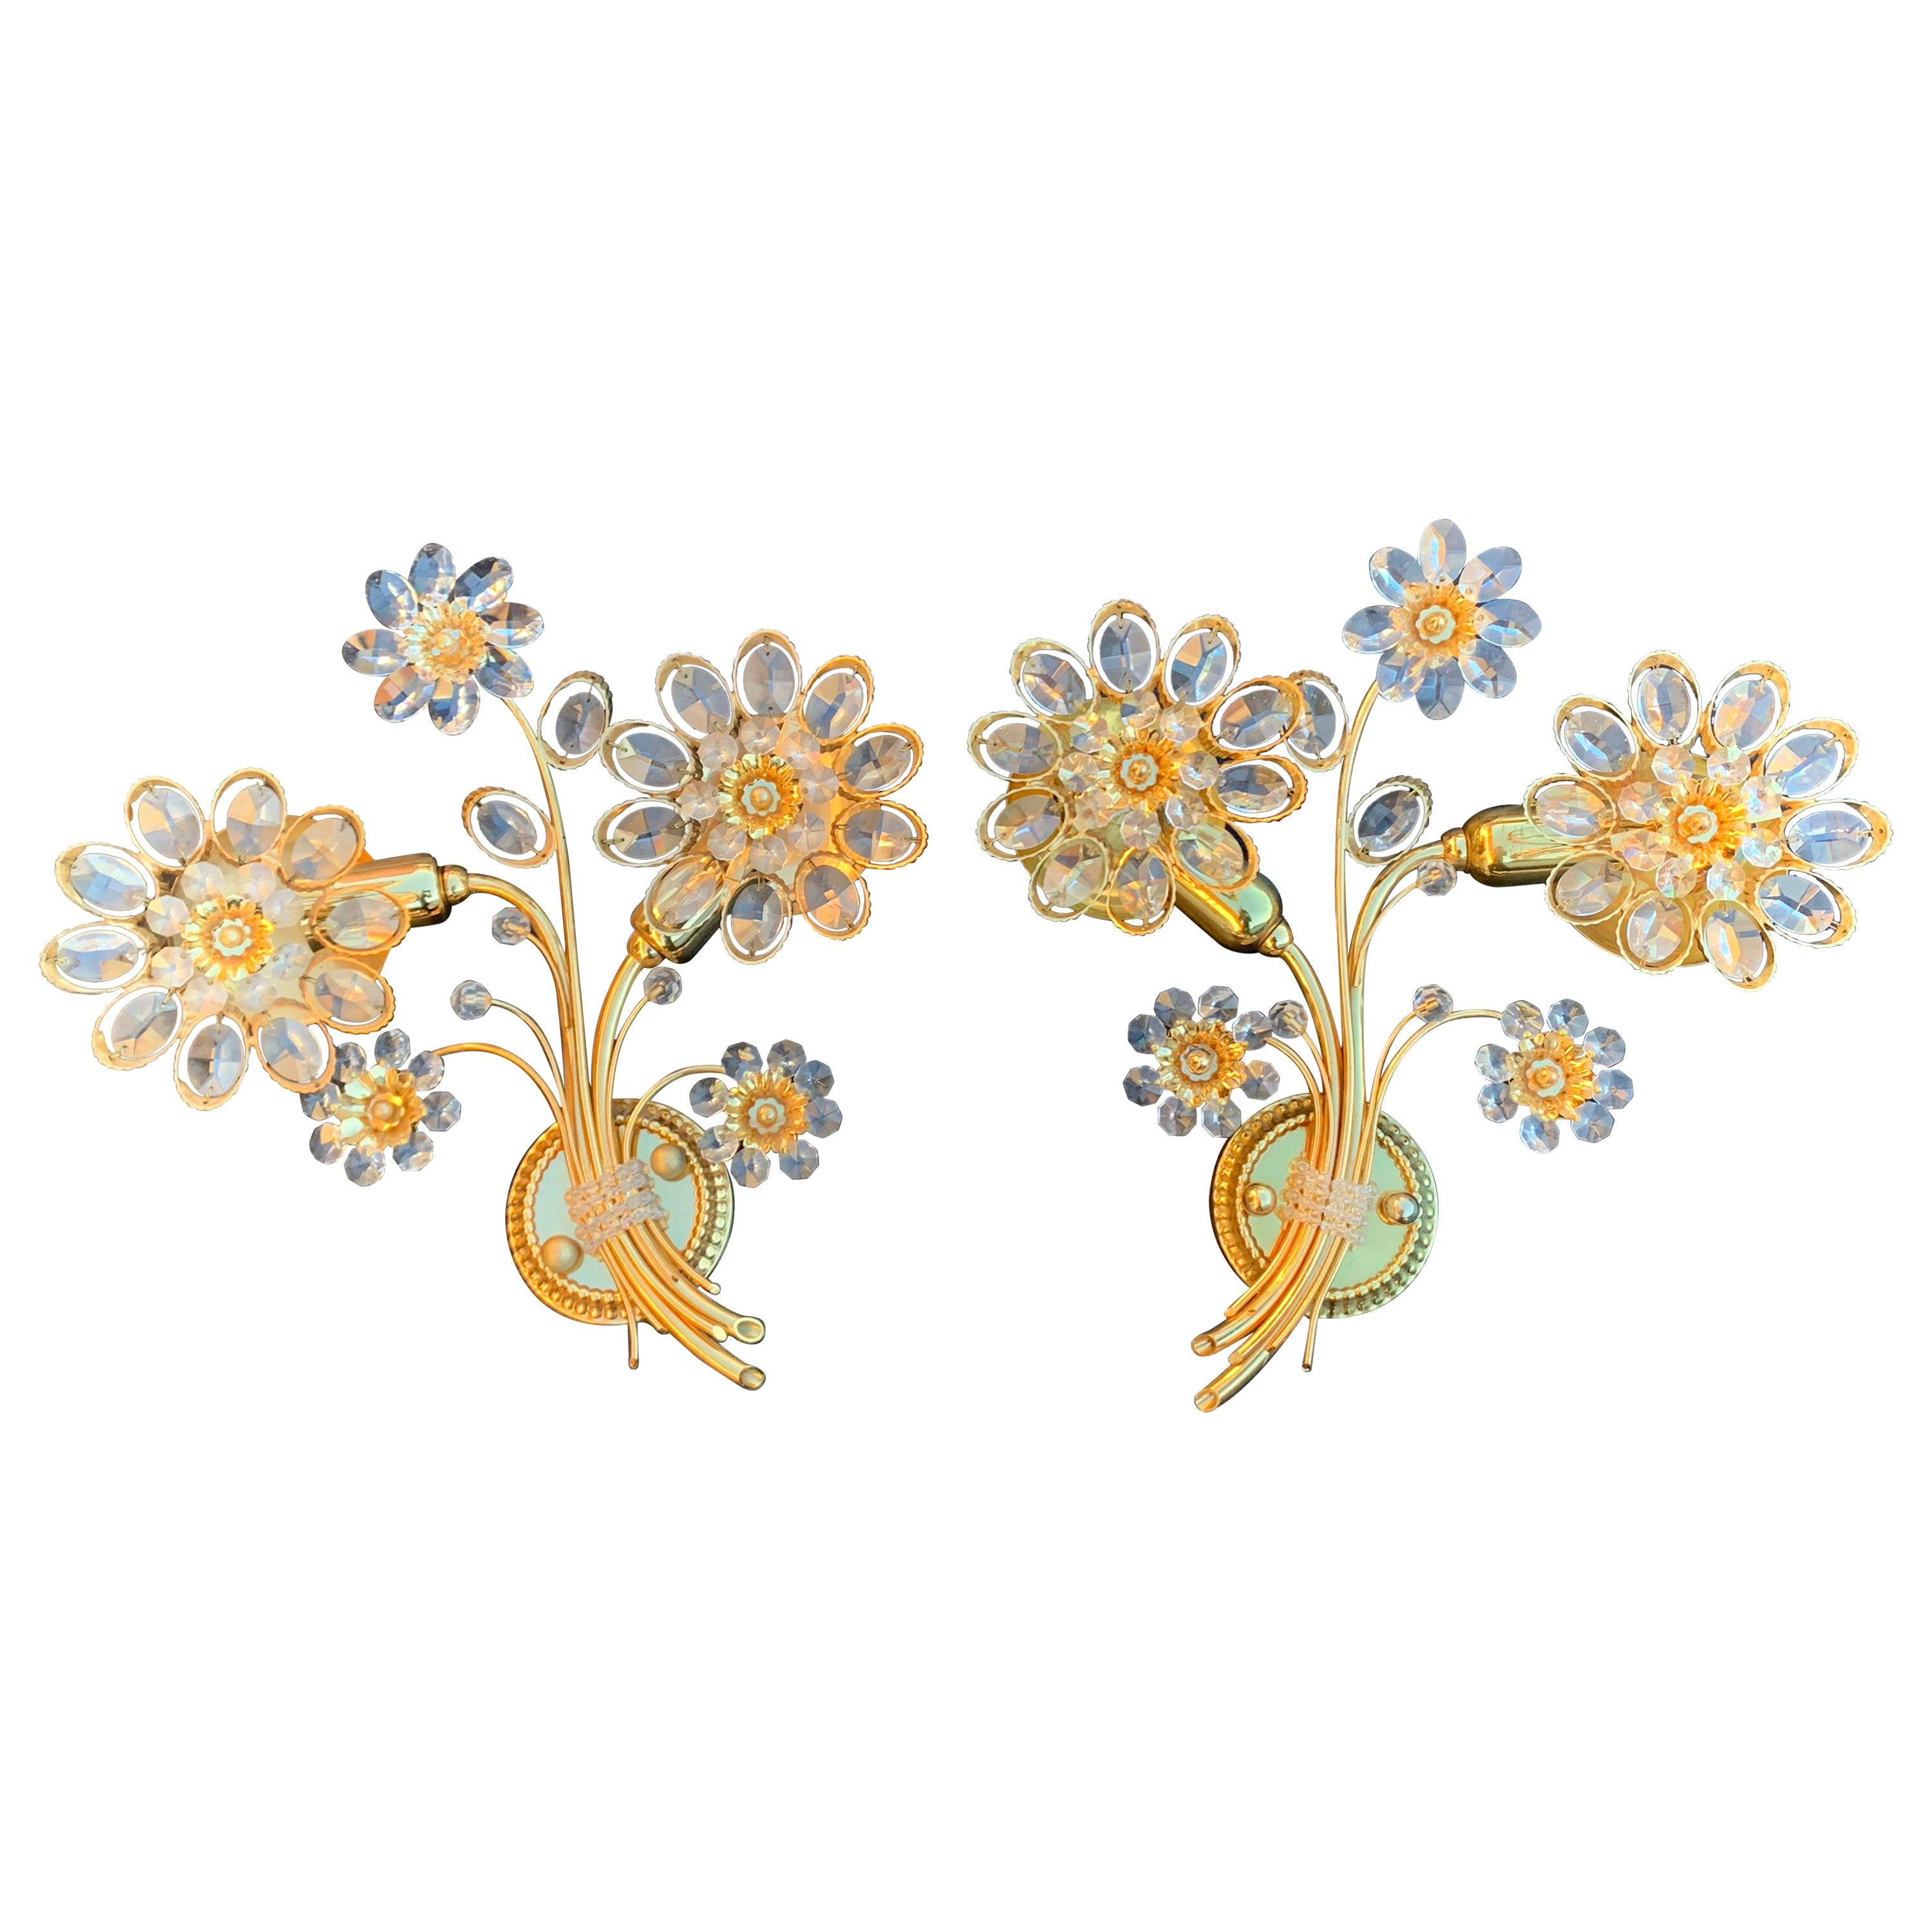 Pair of Palwa Floral Crystal Sconces